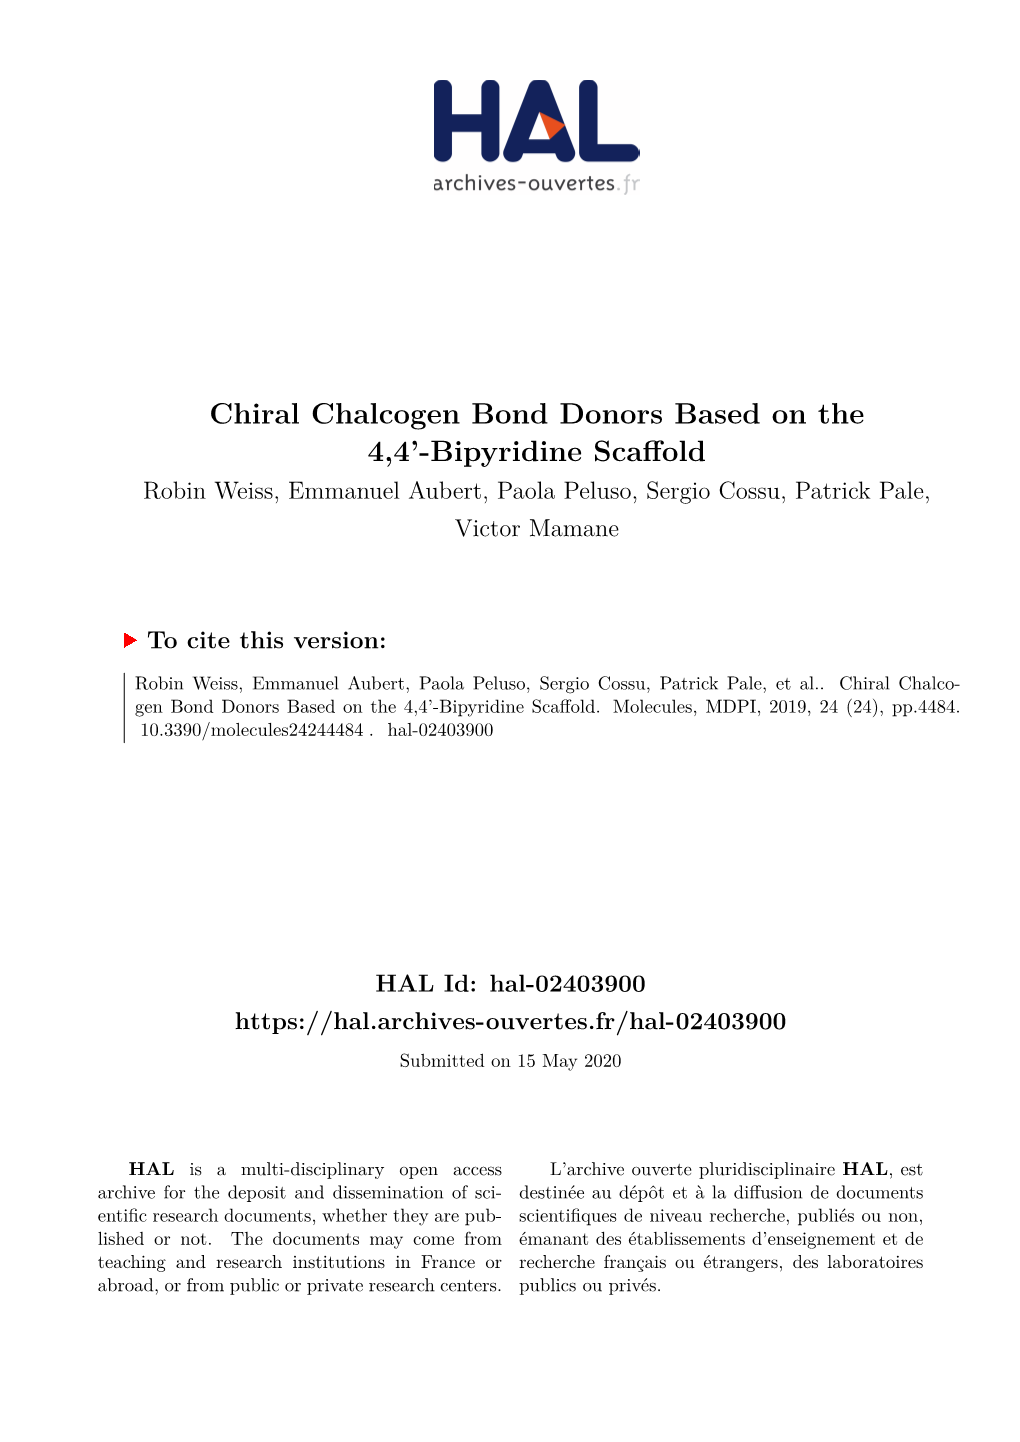 Chiral Chalcogen Bond Donors Based on the 4,4'-Bipyridine Scaffold